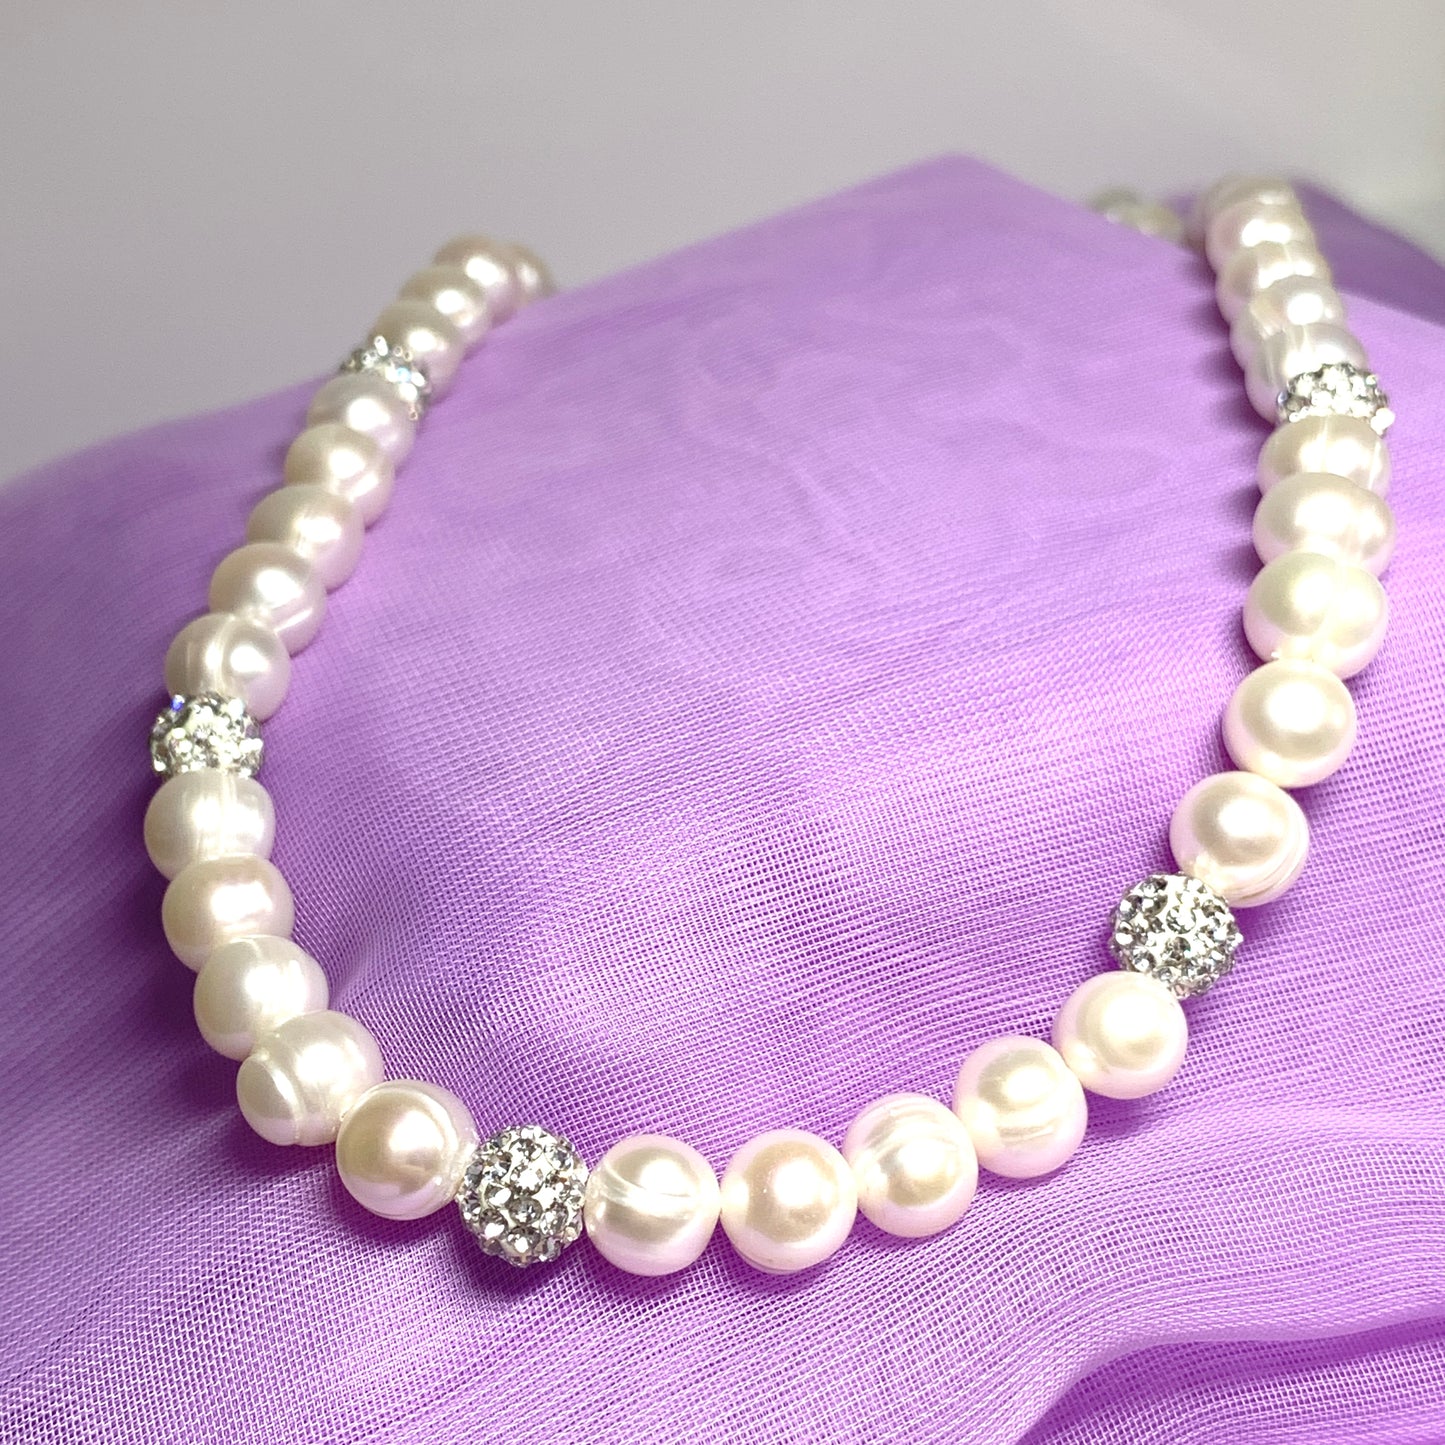 Real freshwater pearl single row necklace with sparkling crystals